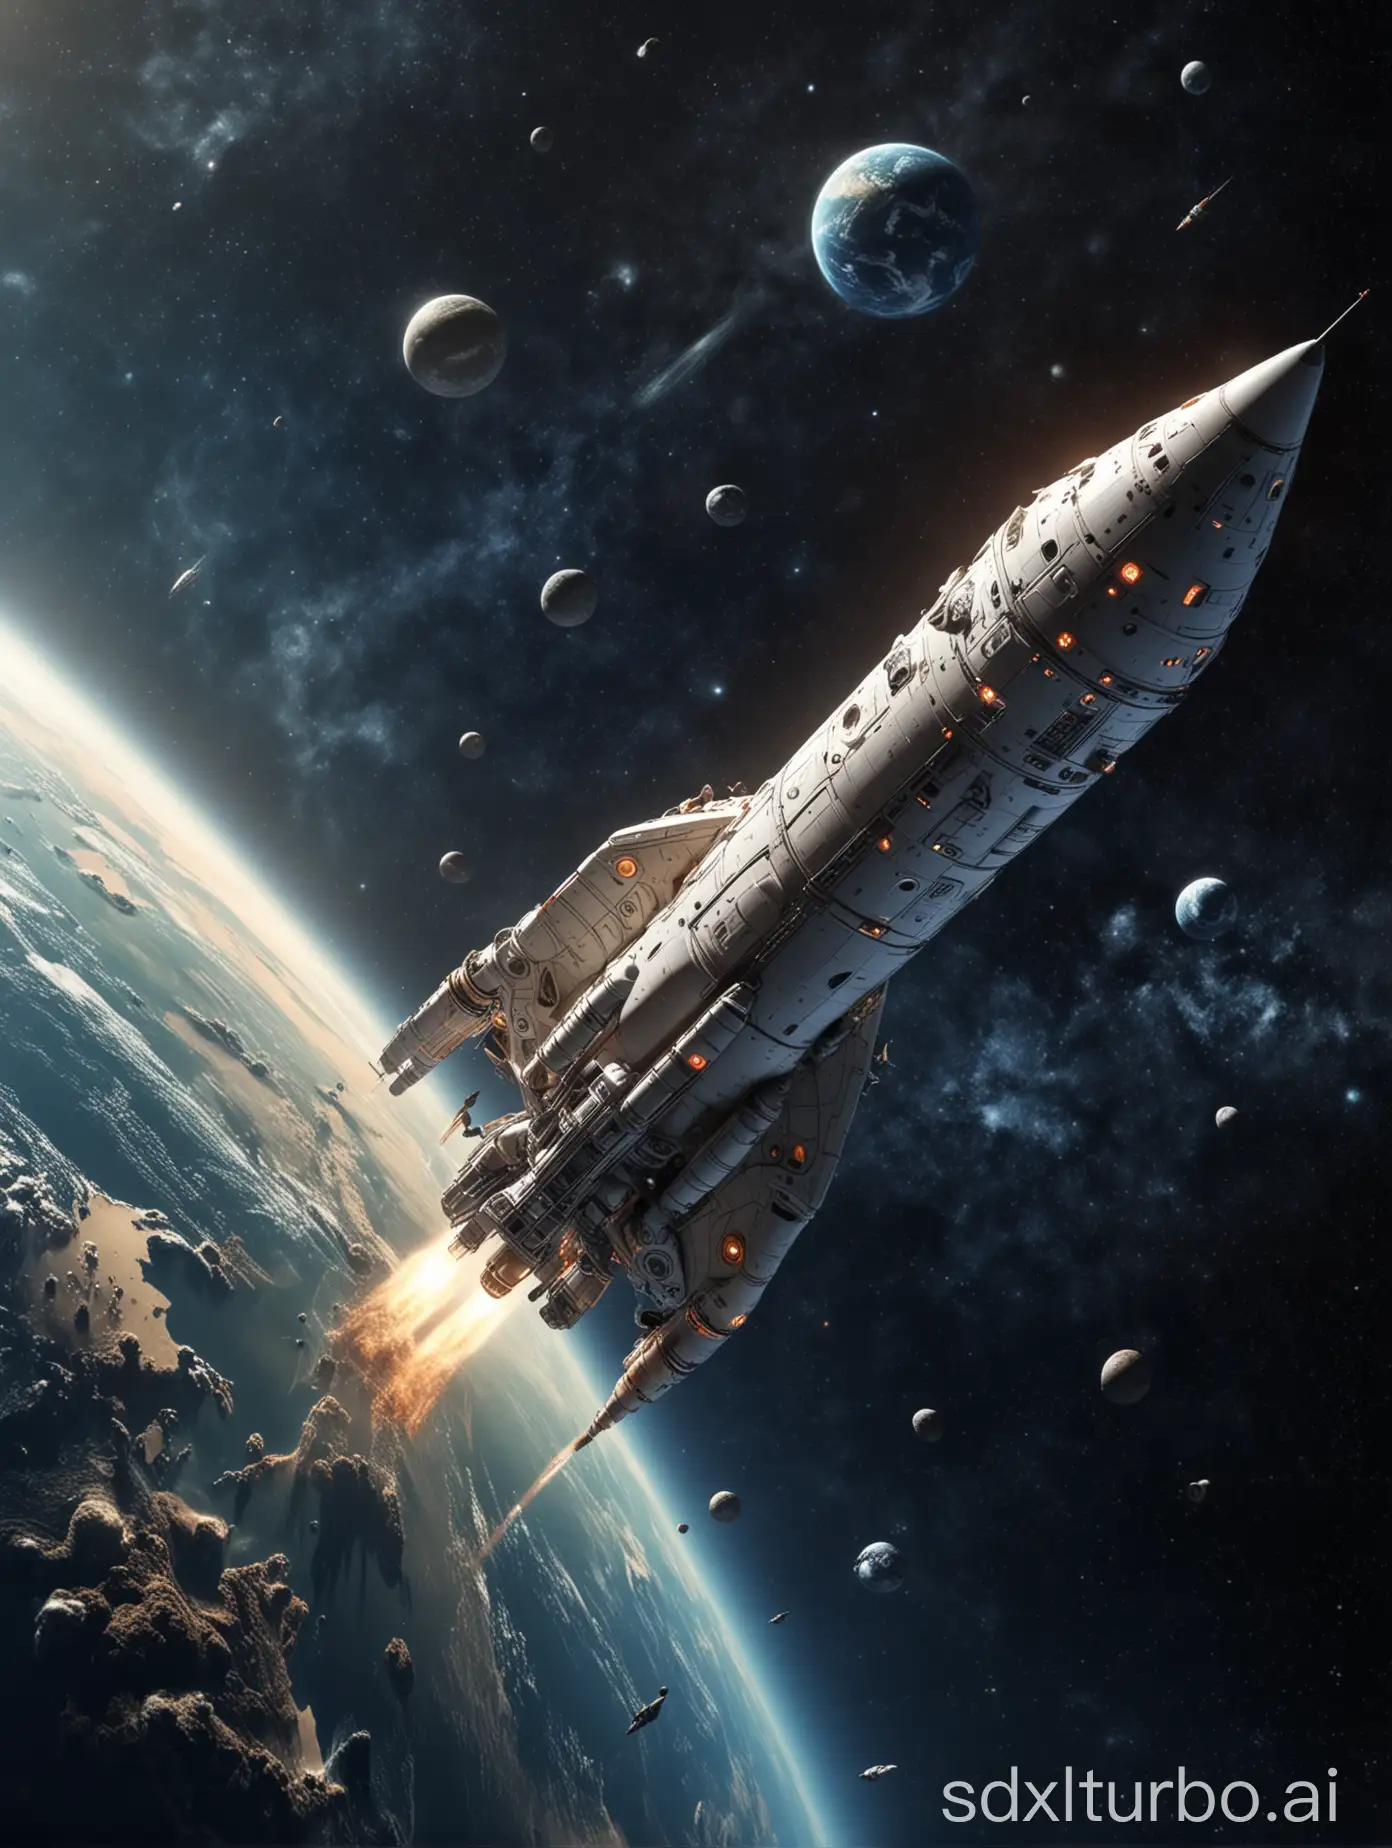 Futuristic-Rocket-Journey-Exploring-Earth-from-Outer-Space